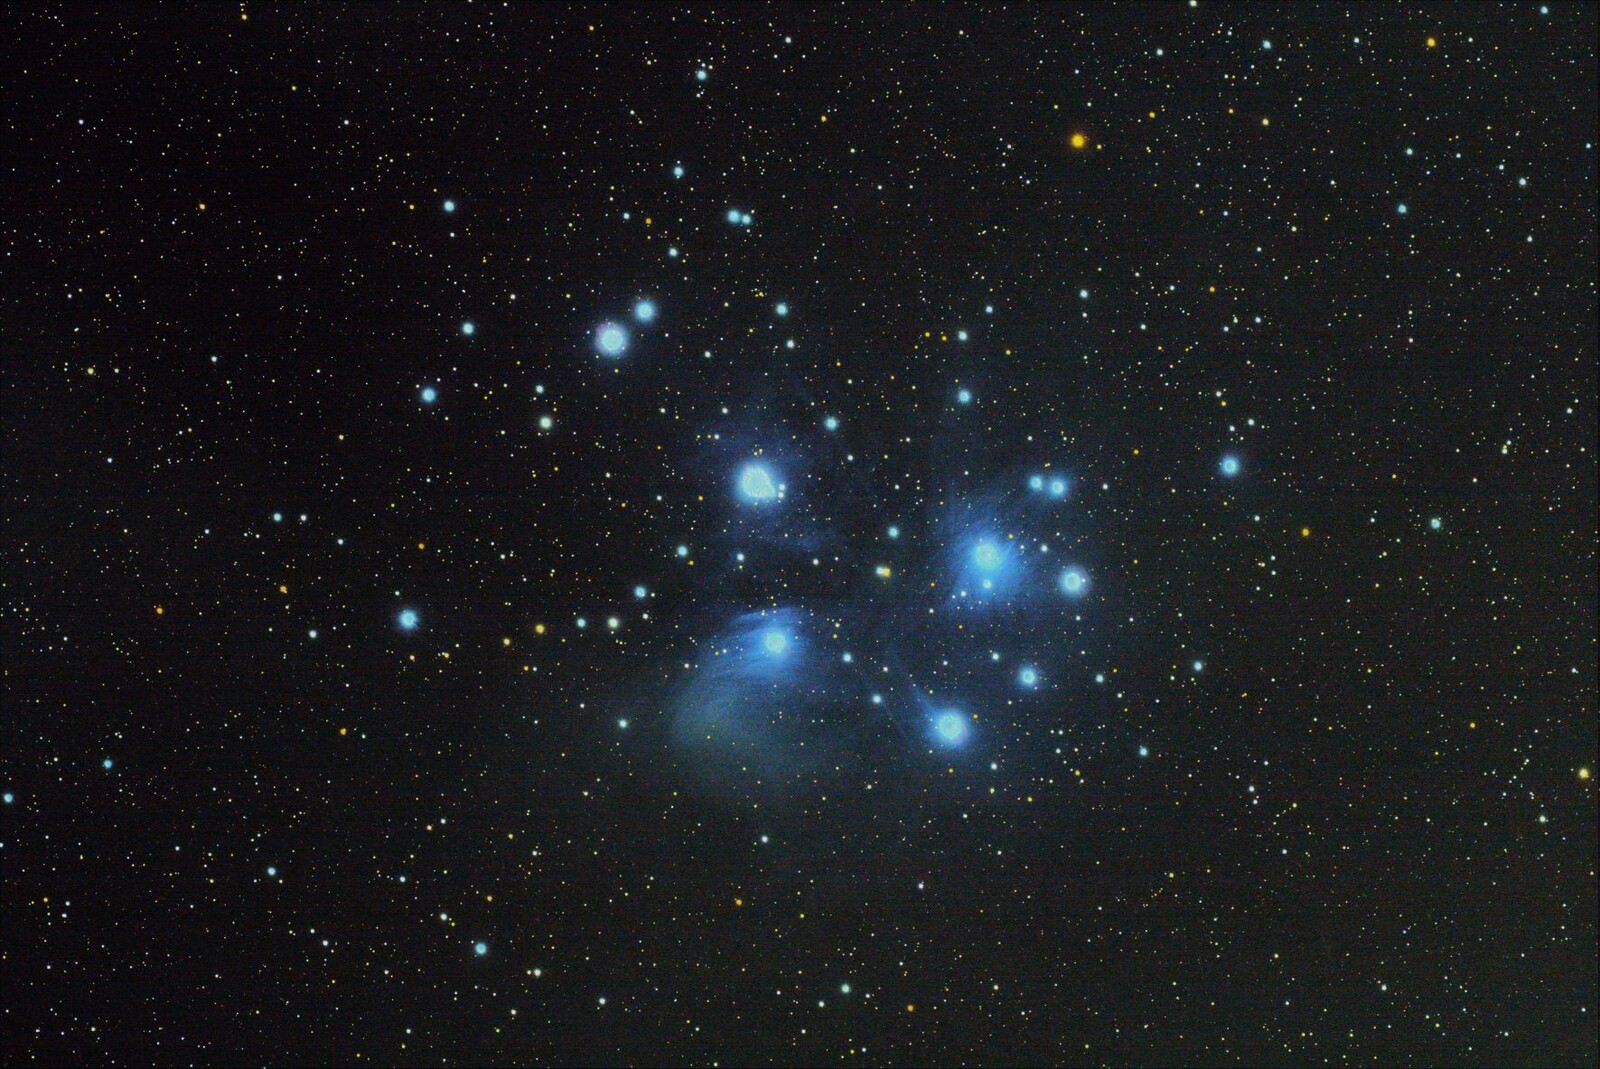 The Seven Sisters Aka The Pleiades In M45 29 Jan 22 Slight Processing